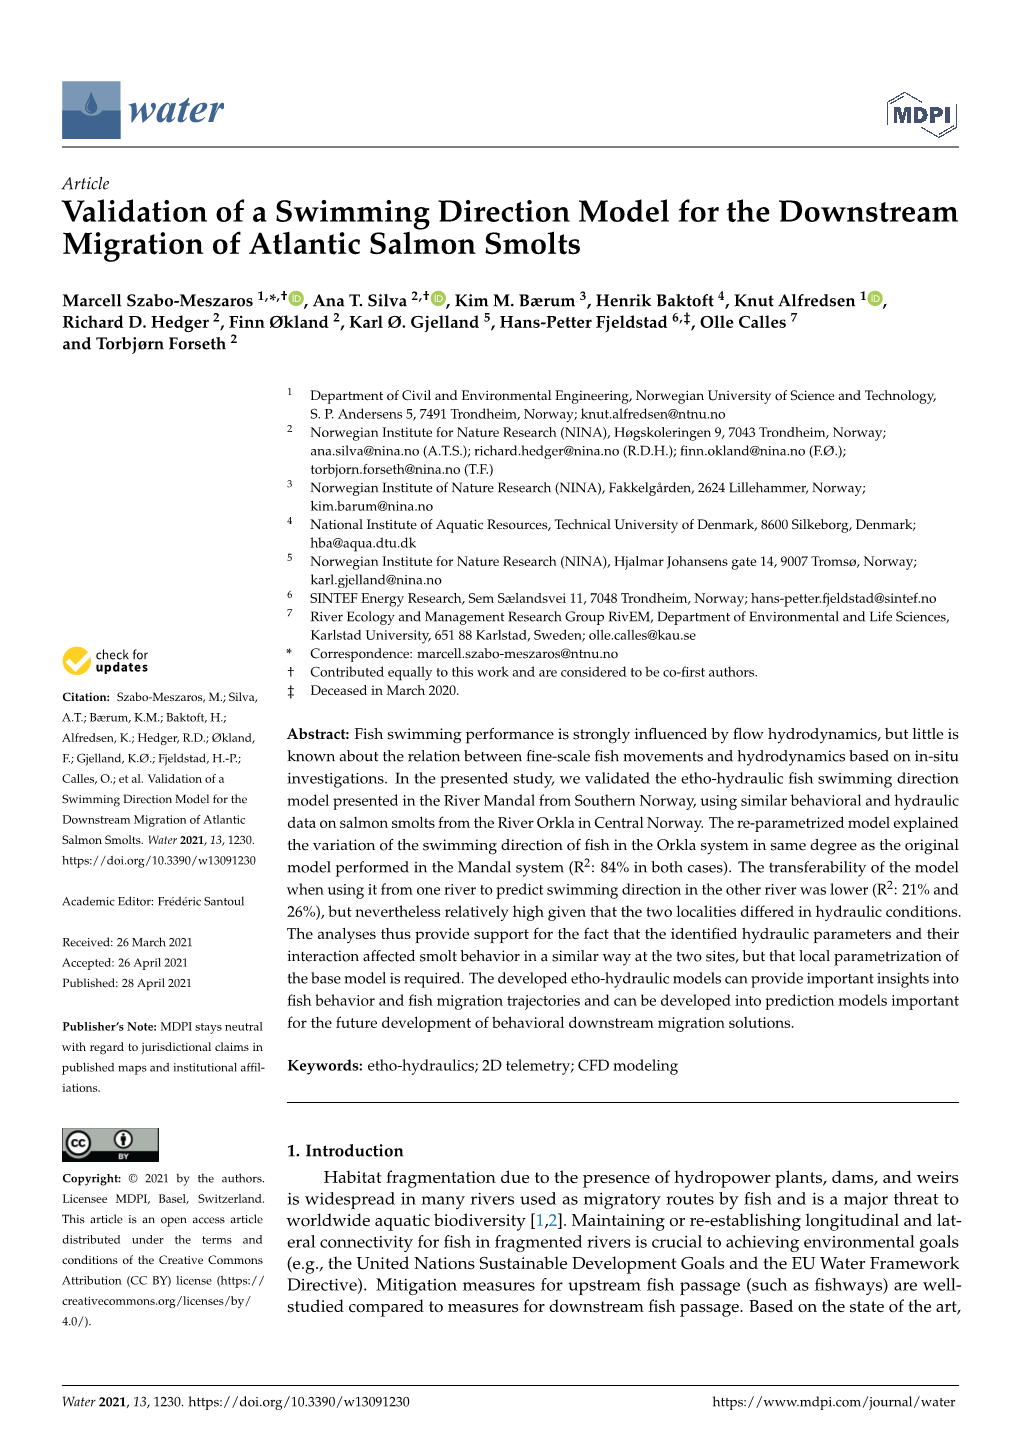 Validation of a Swimming Direction Model for the Downstream Migration of Atlantic Salmon Smolts